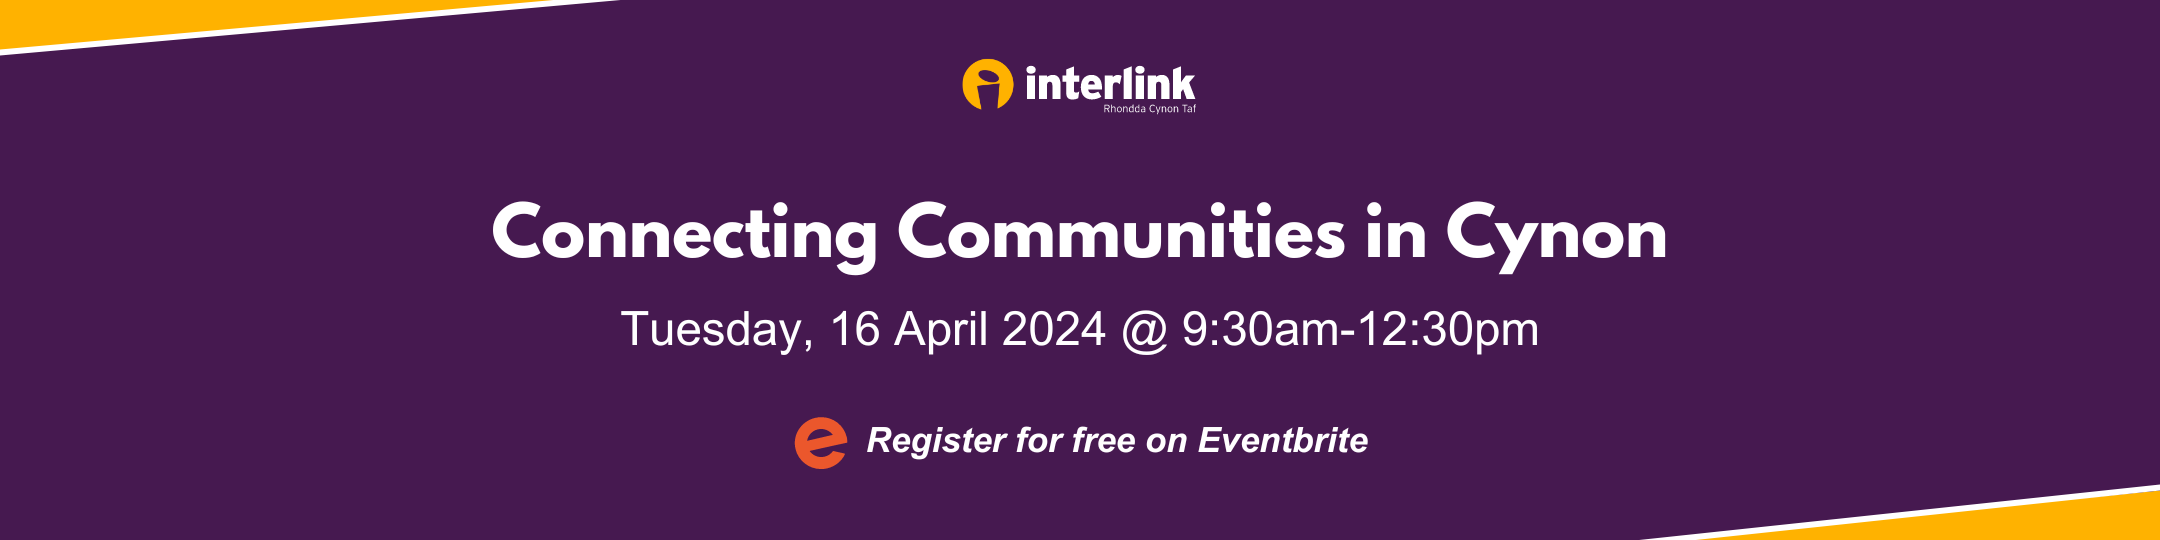 Connecting Communities in Cynon - Interlink RCT